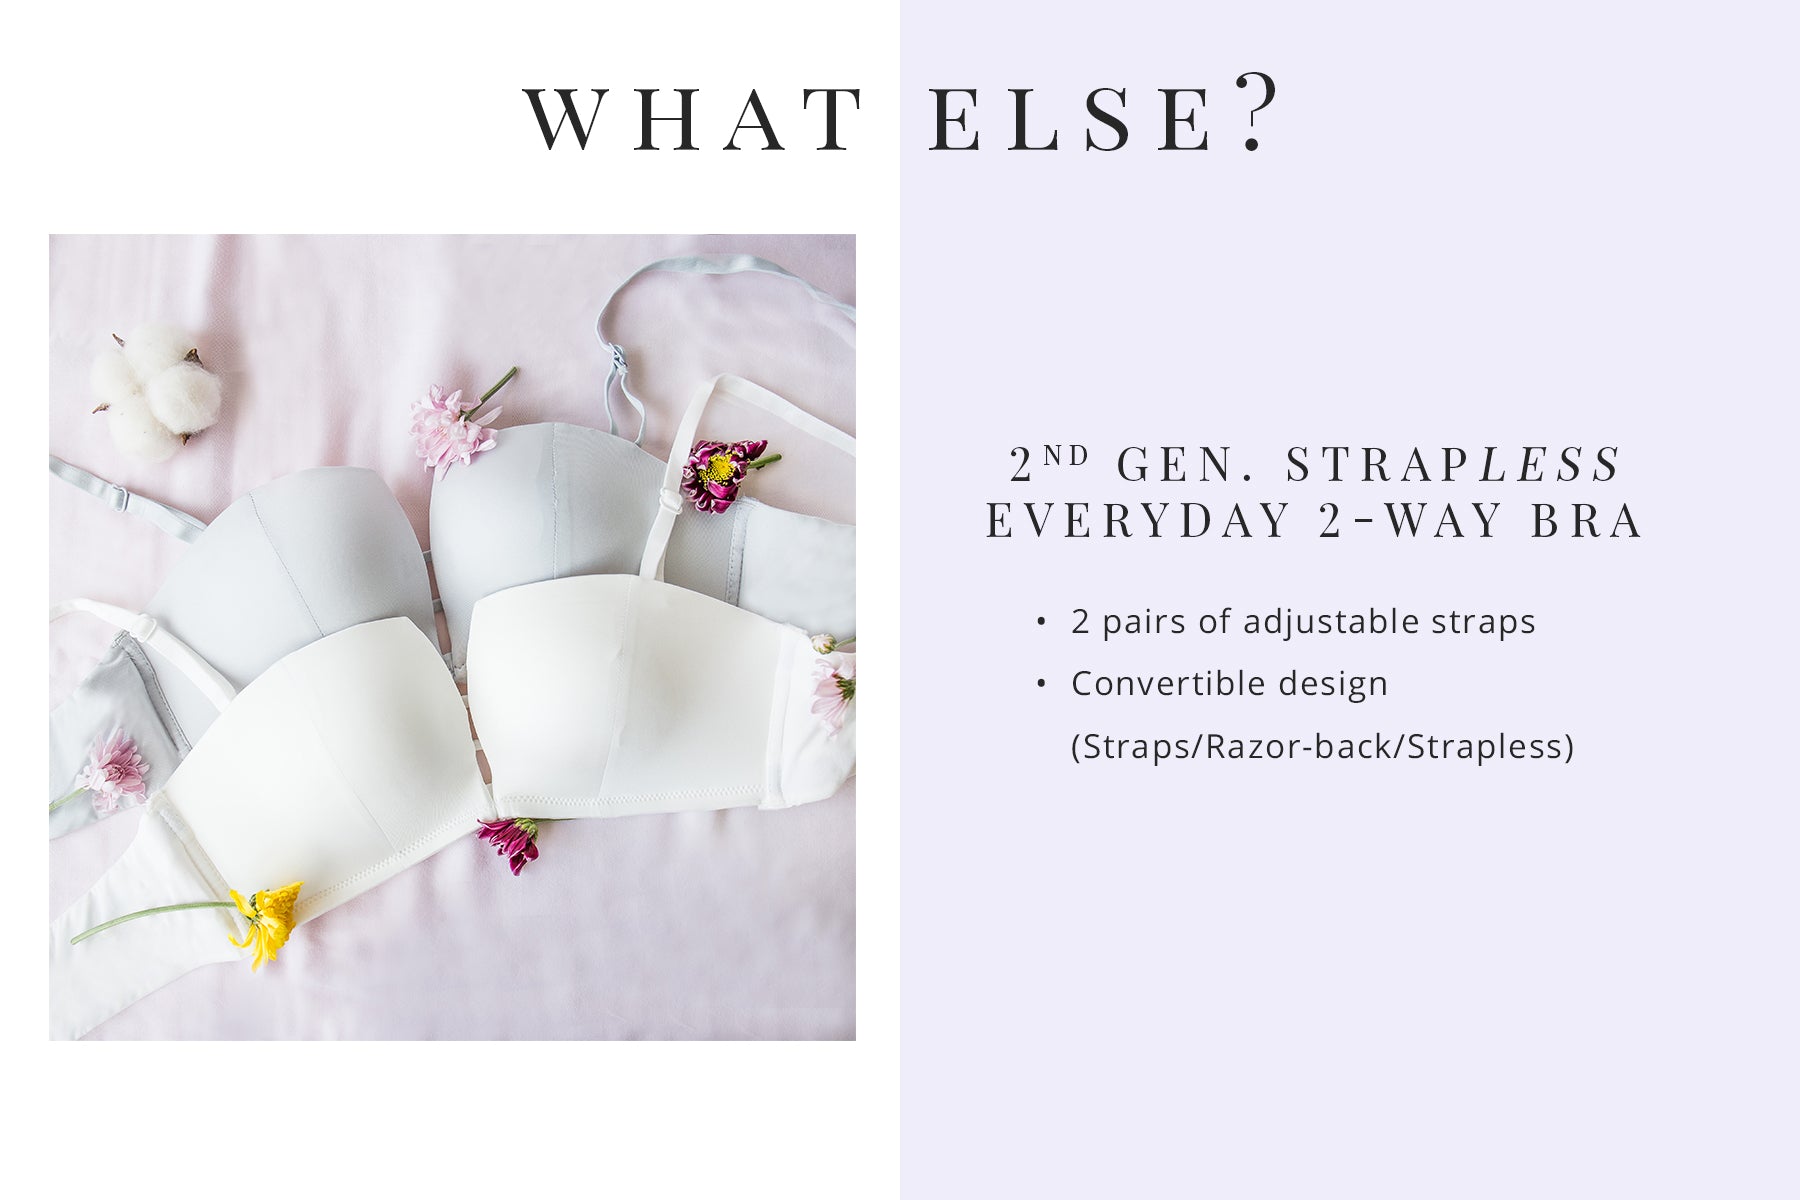 Strapless Bras: 1st Gen. vs. 2nd Gen. what's the difference?